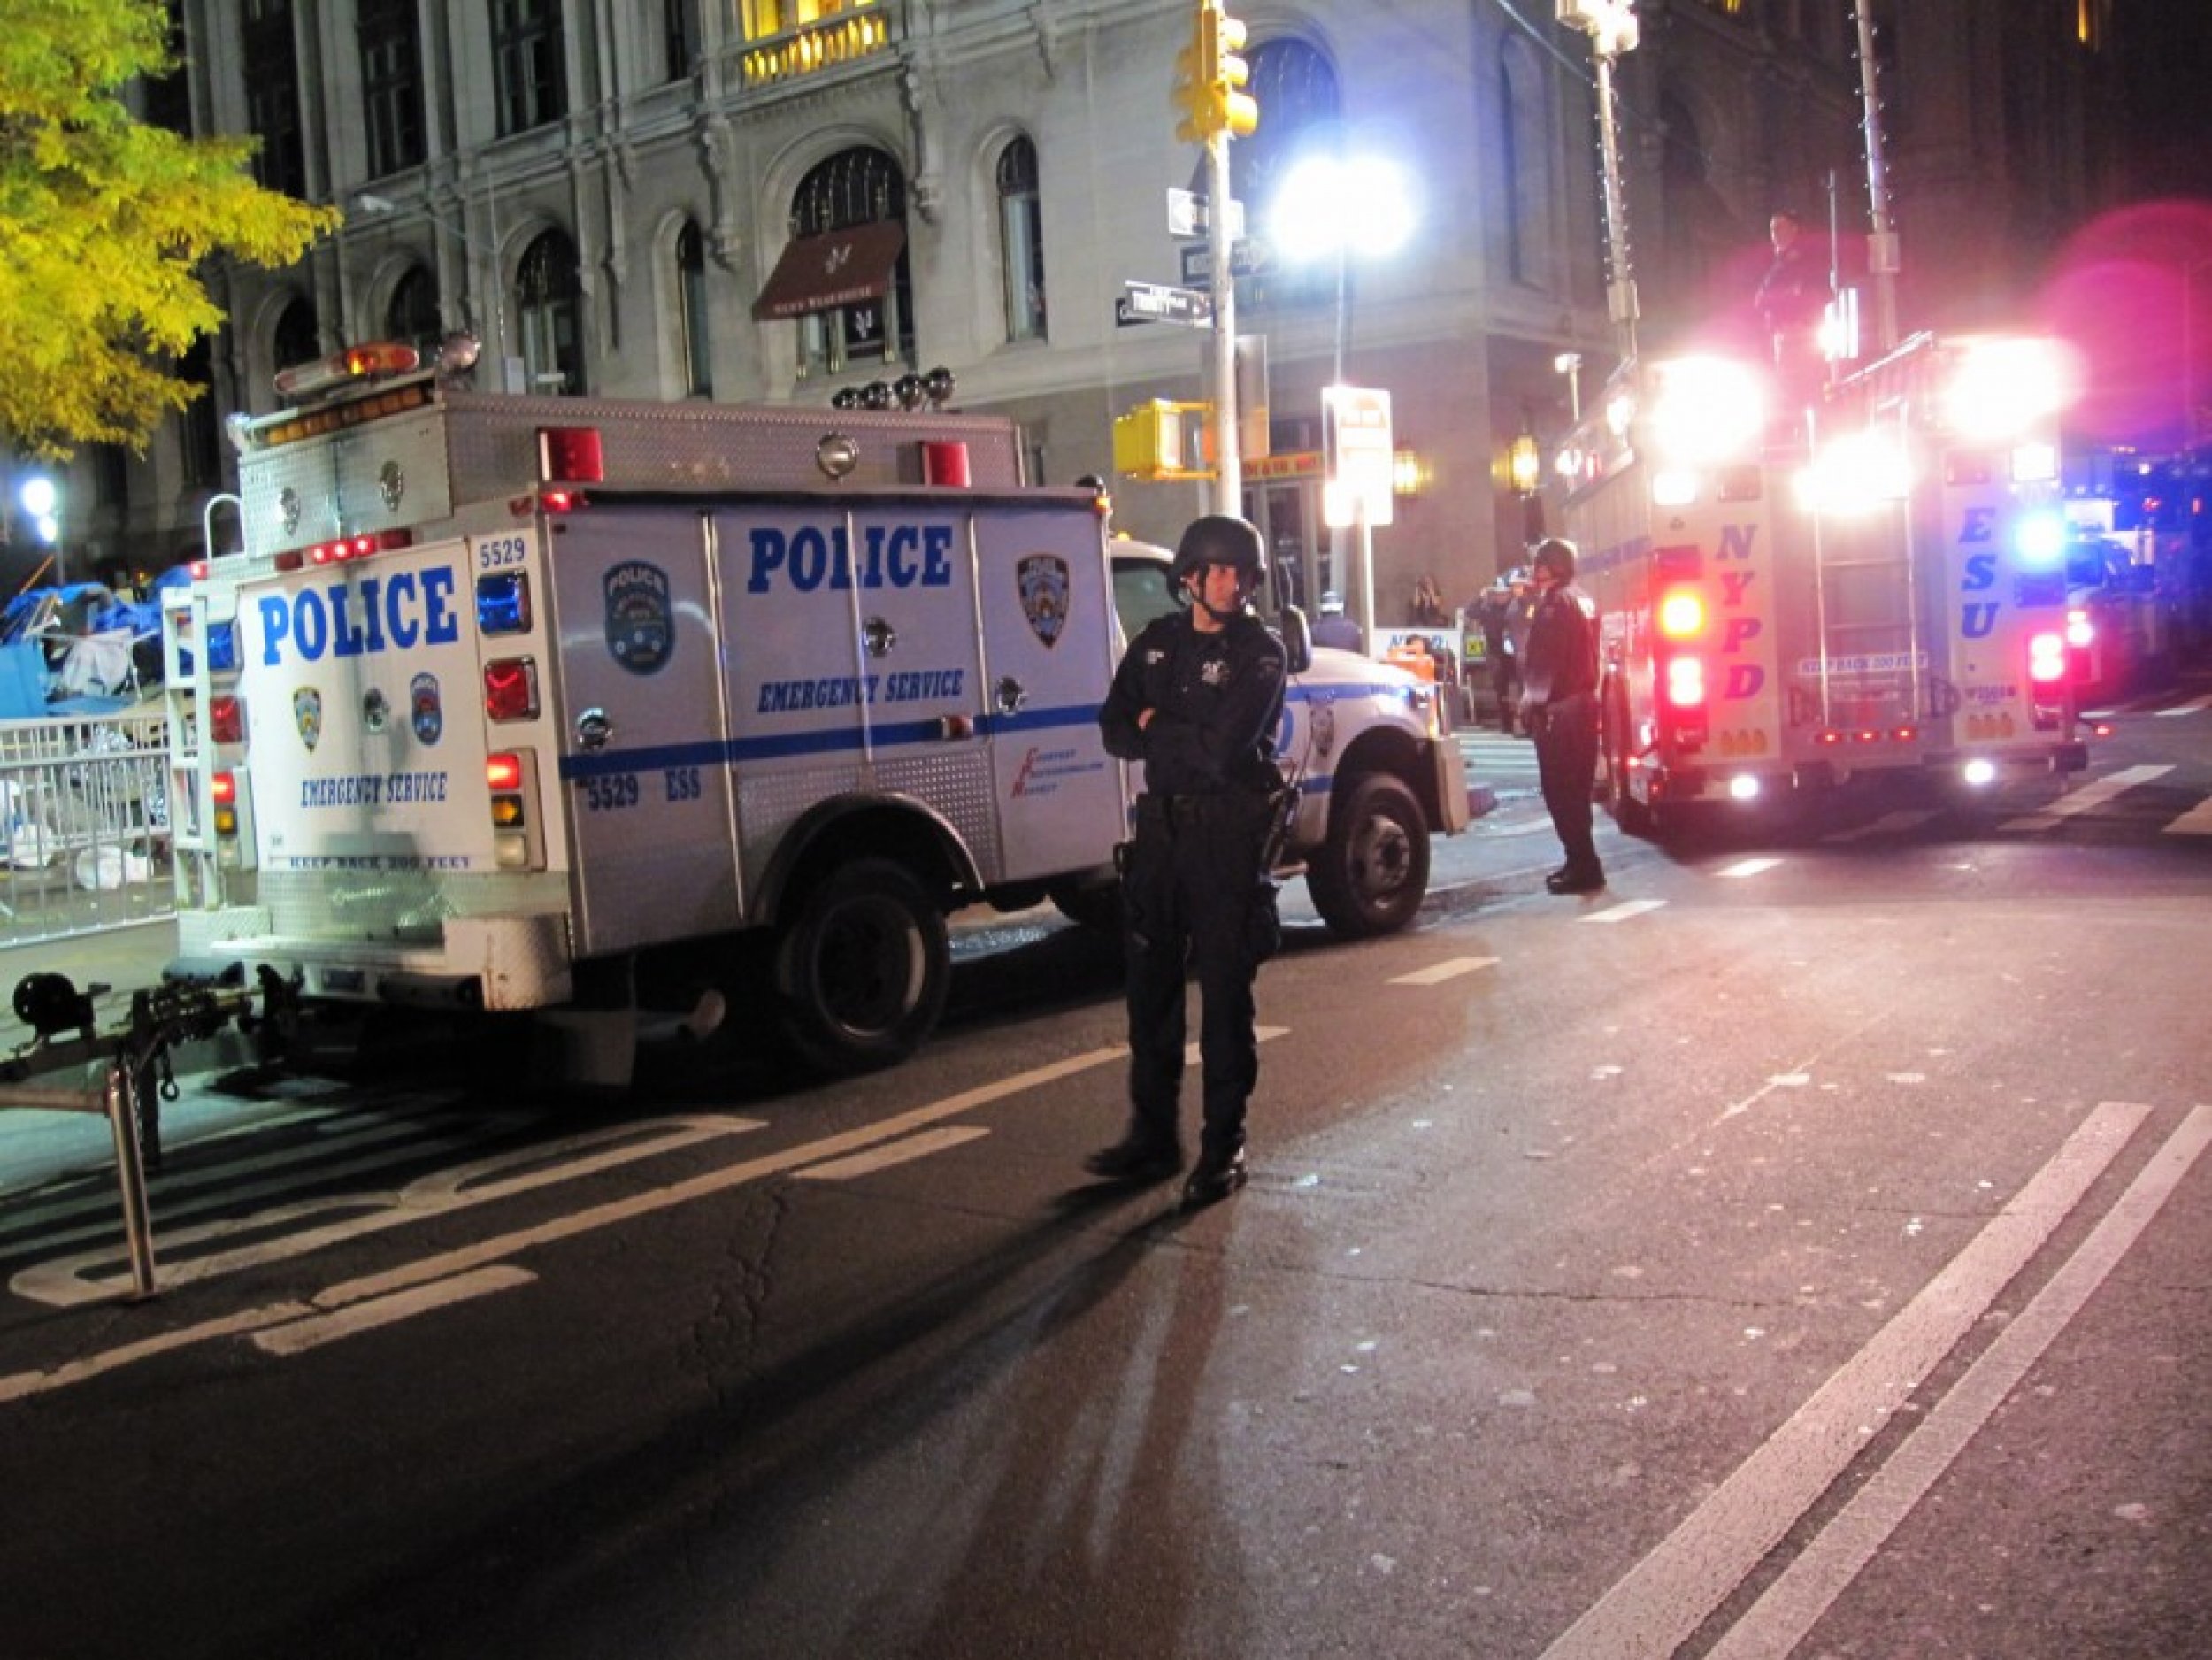 Police Cars Gather at Occupy Wall Street Camp